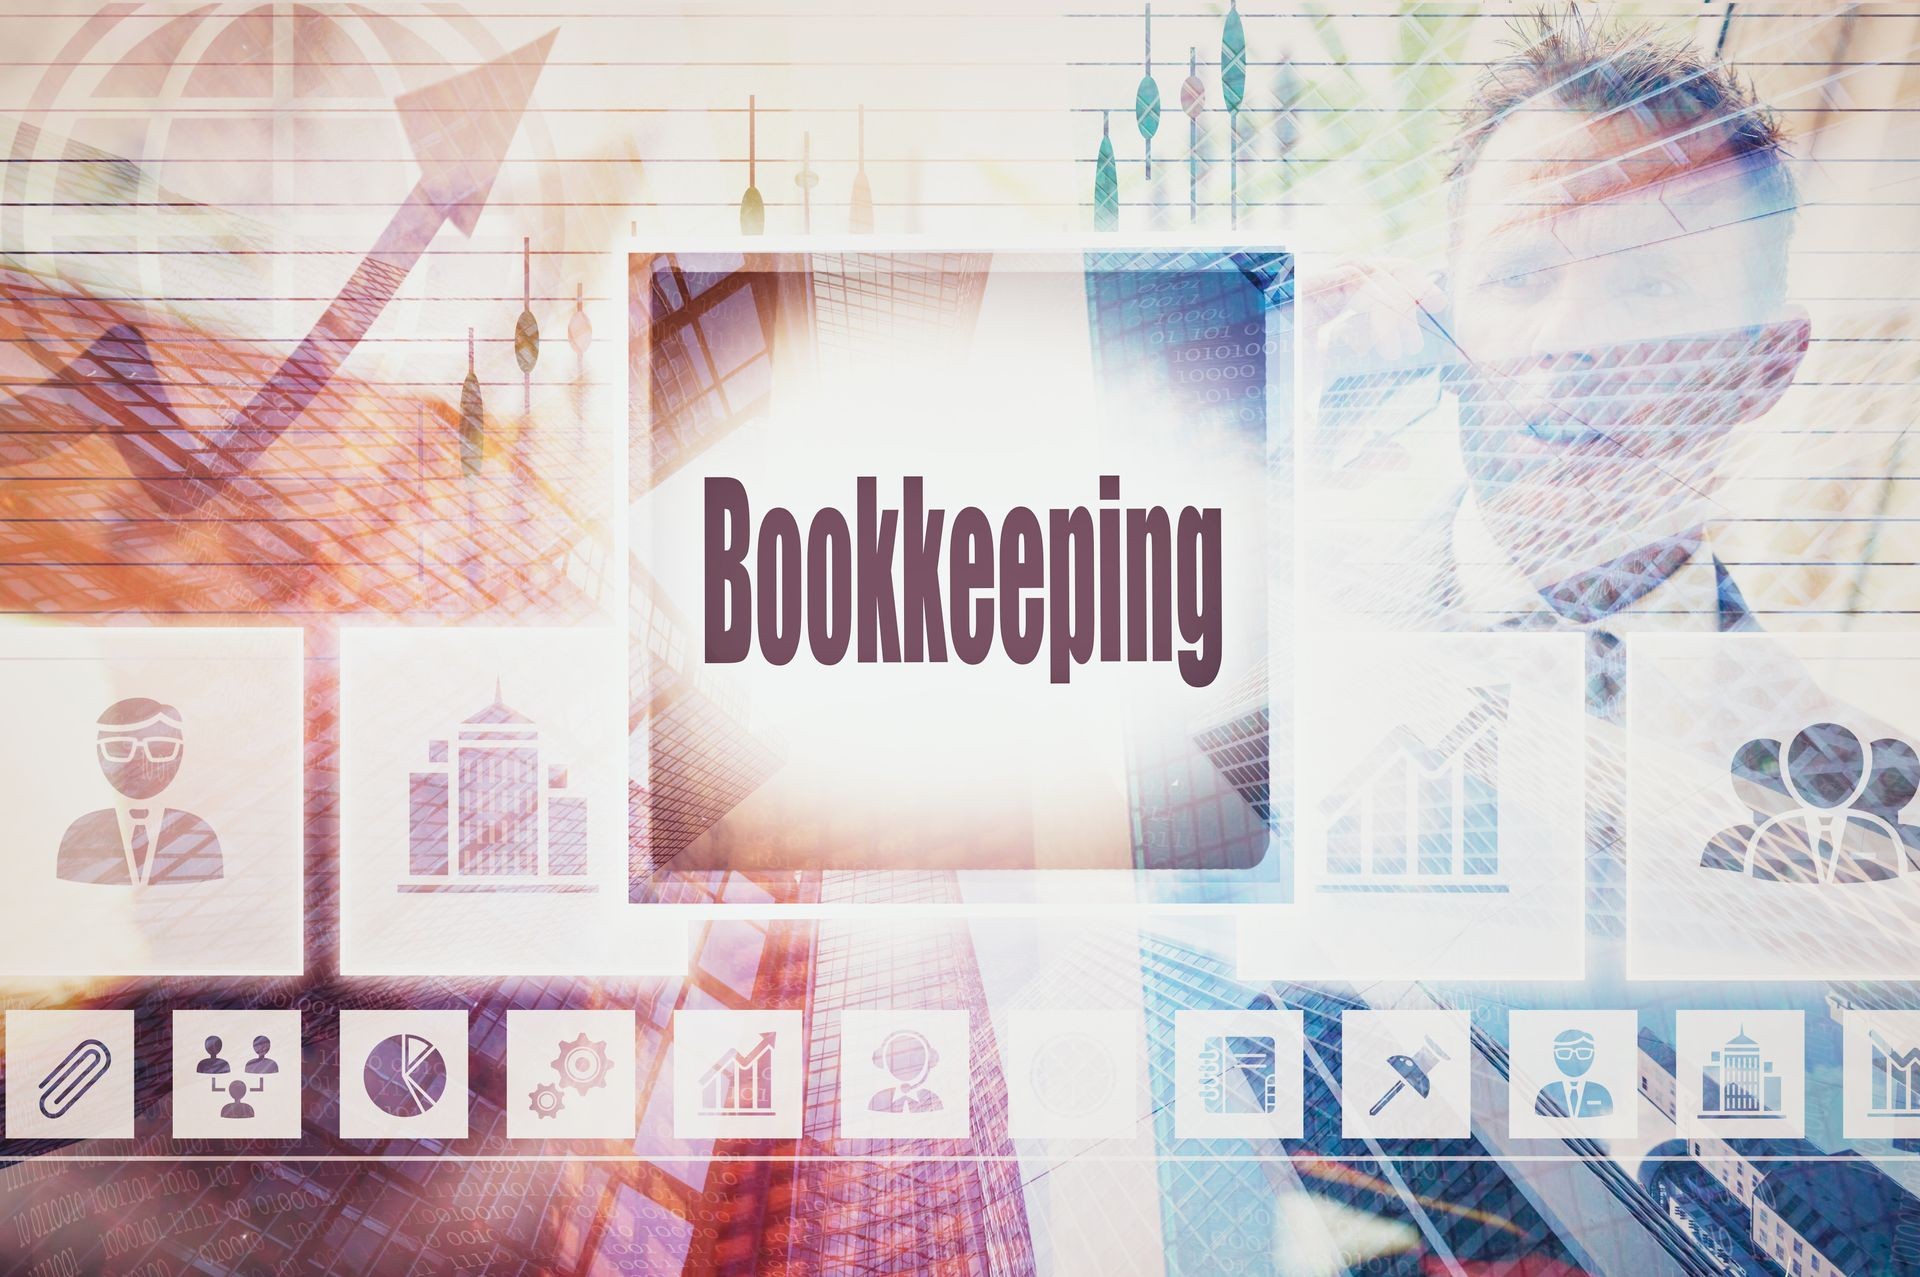 Business Bookkeeping collage concept